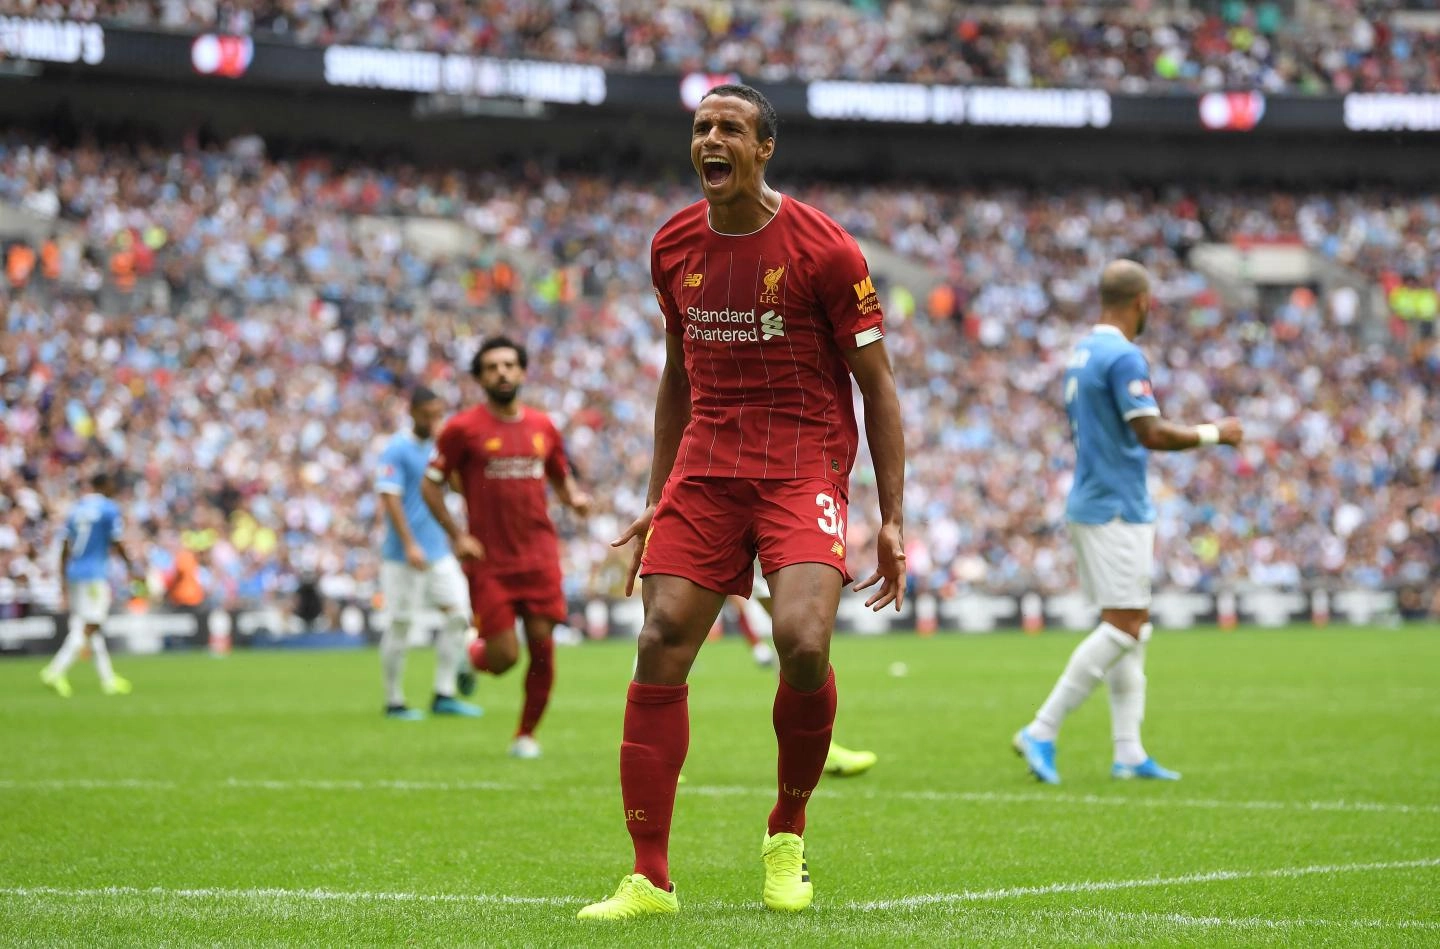 August 2019: Scoring against Manchester City in the Community Shield